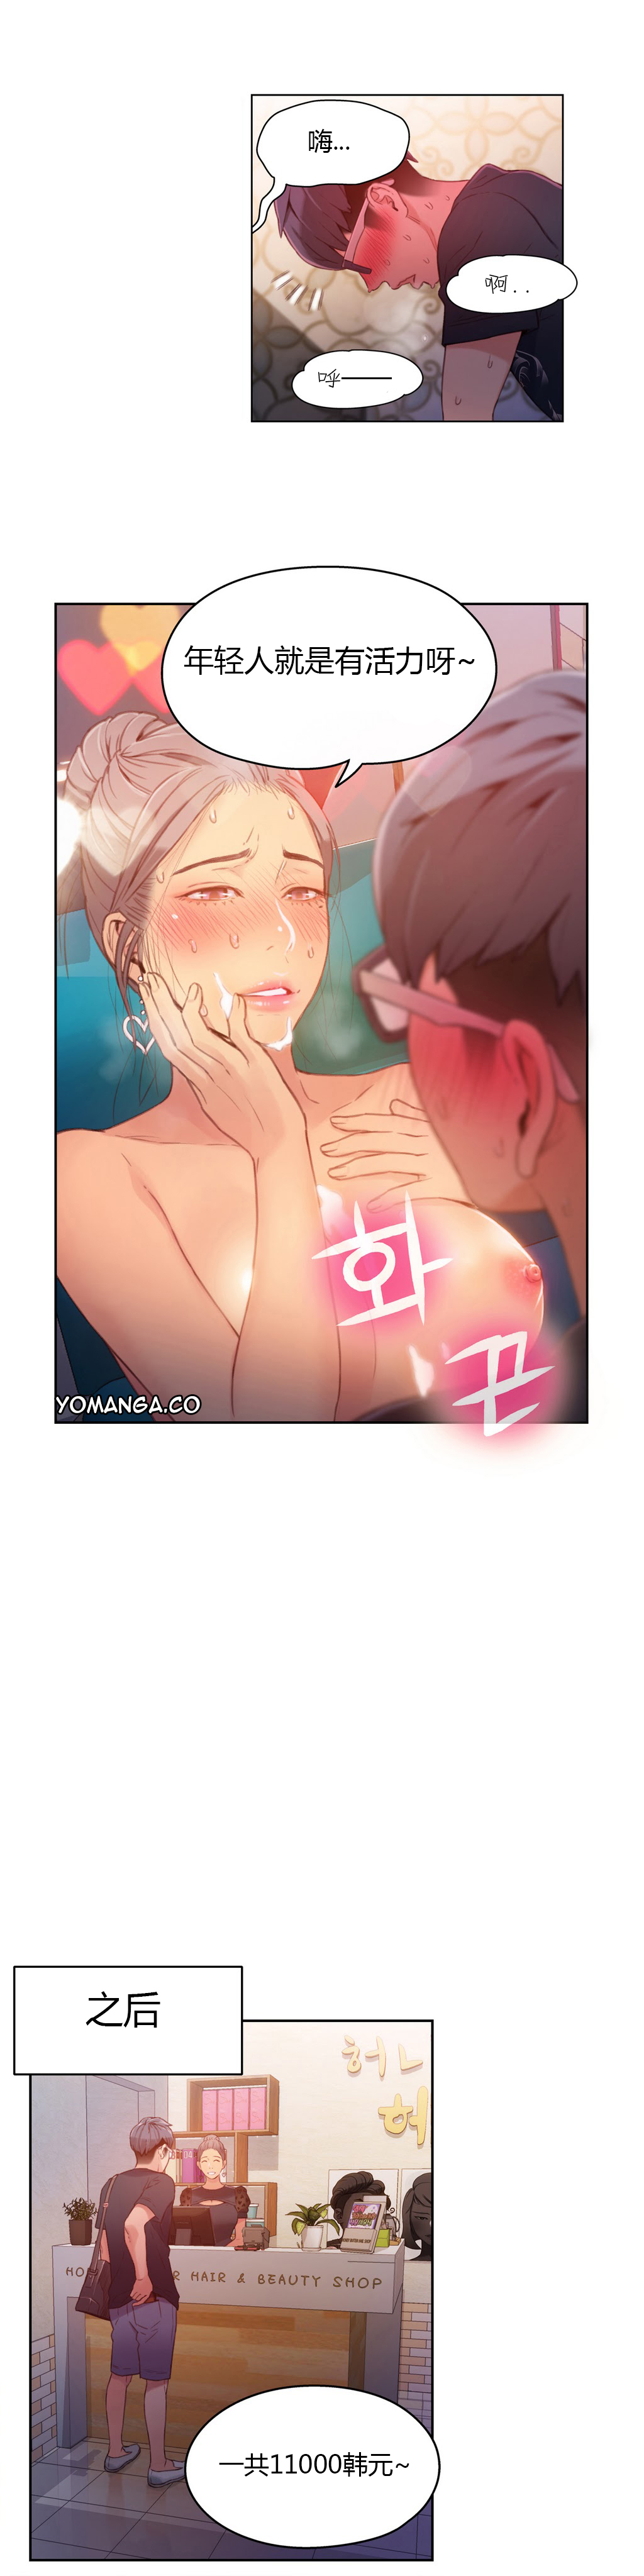 [Park Hyeongjun] Sweet Guy Ch.22-30 (Chinese) page 20 full